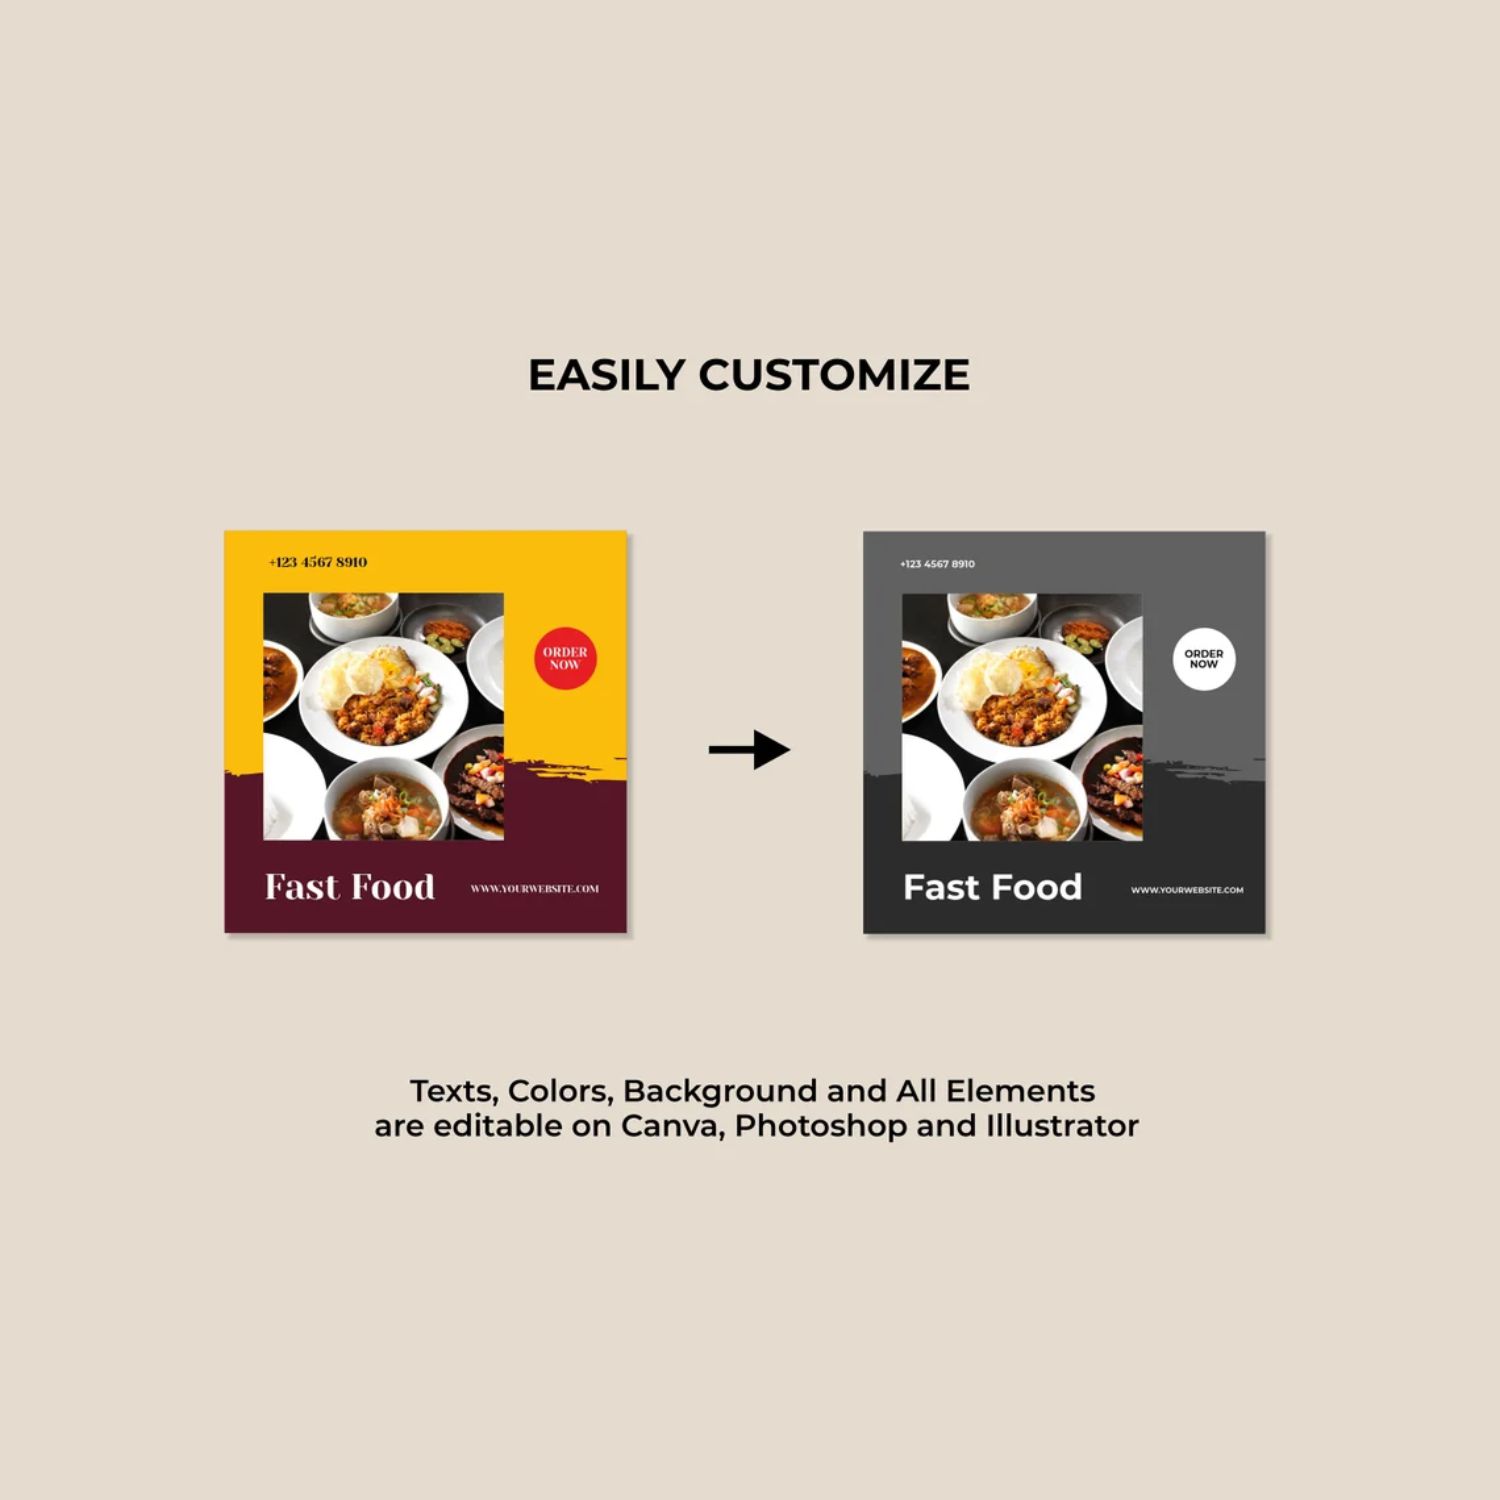 Food & Beverage Story and Icon Social Media Template Before And After.